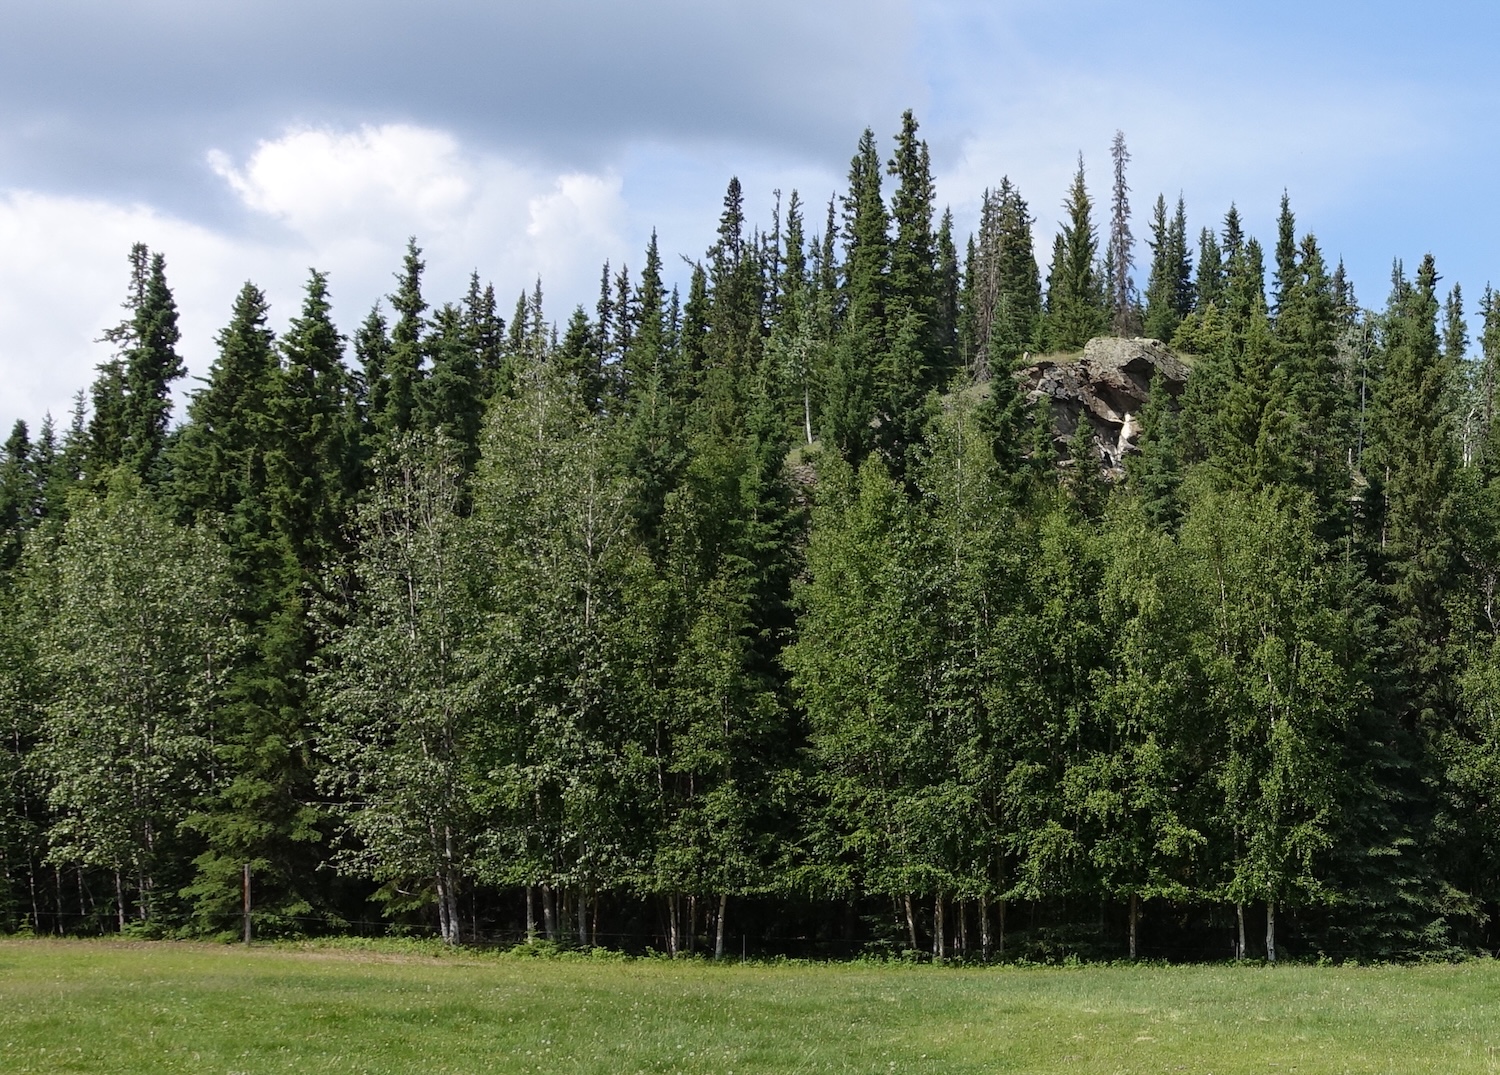 A rock crag pokes up between spruce trees at the top of a small hill above a hayfield.